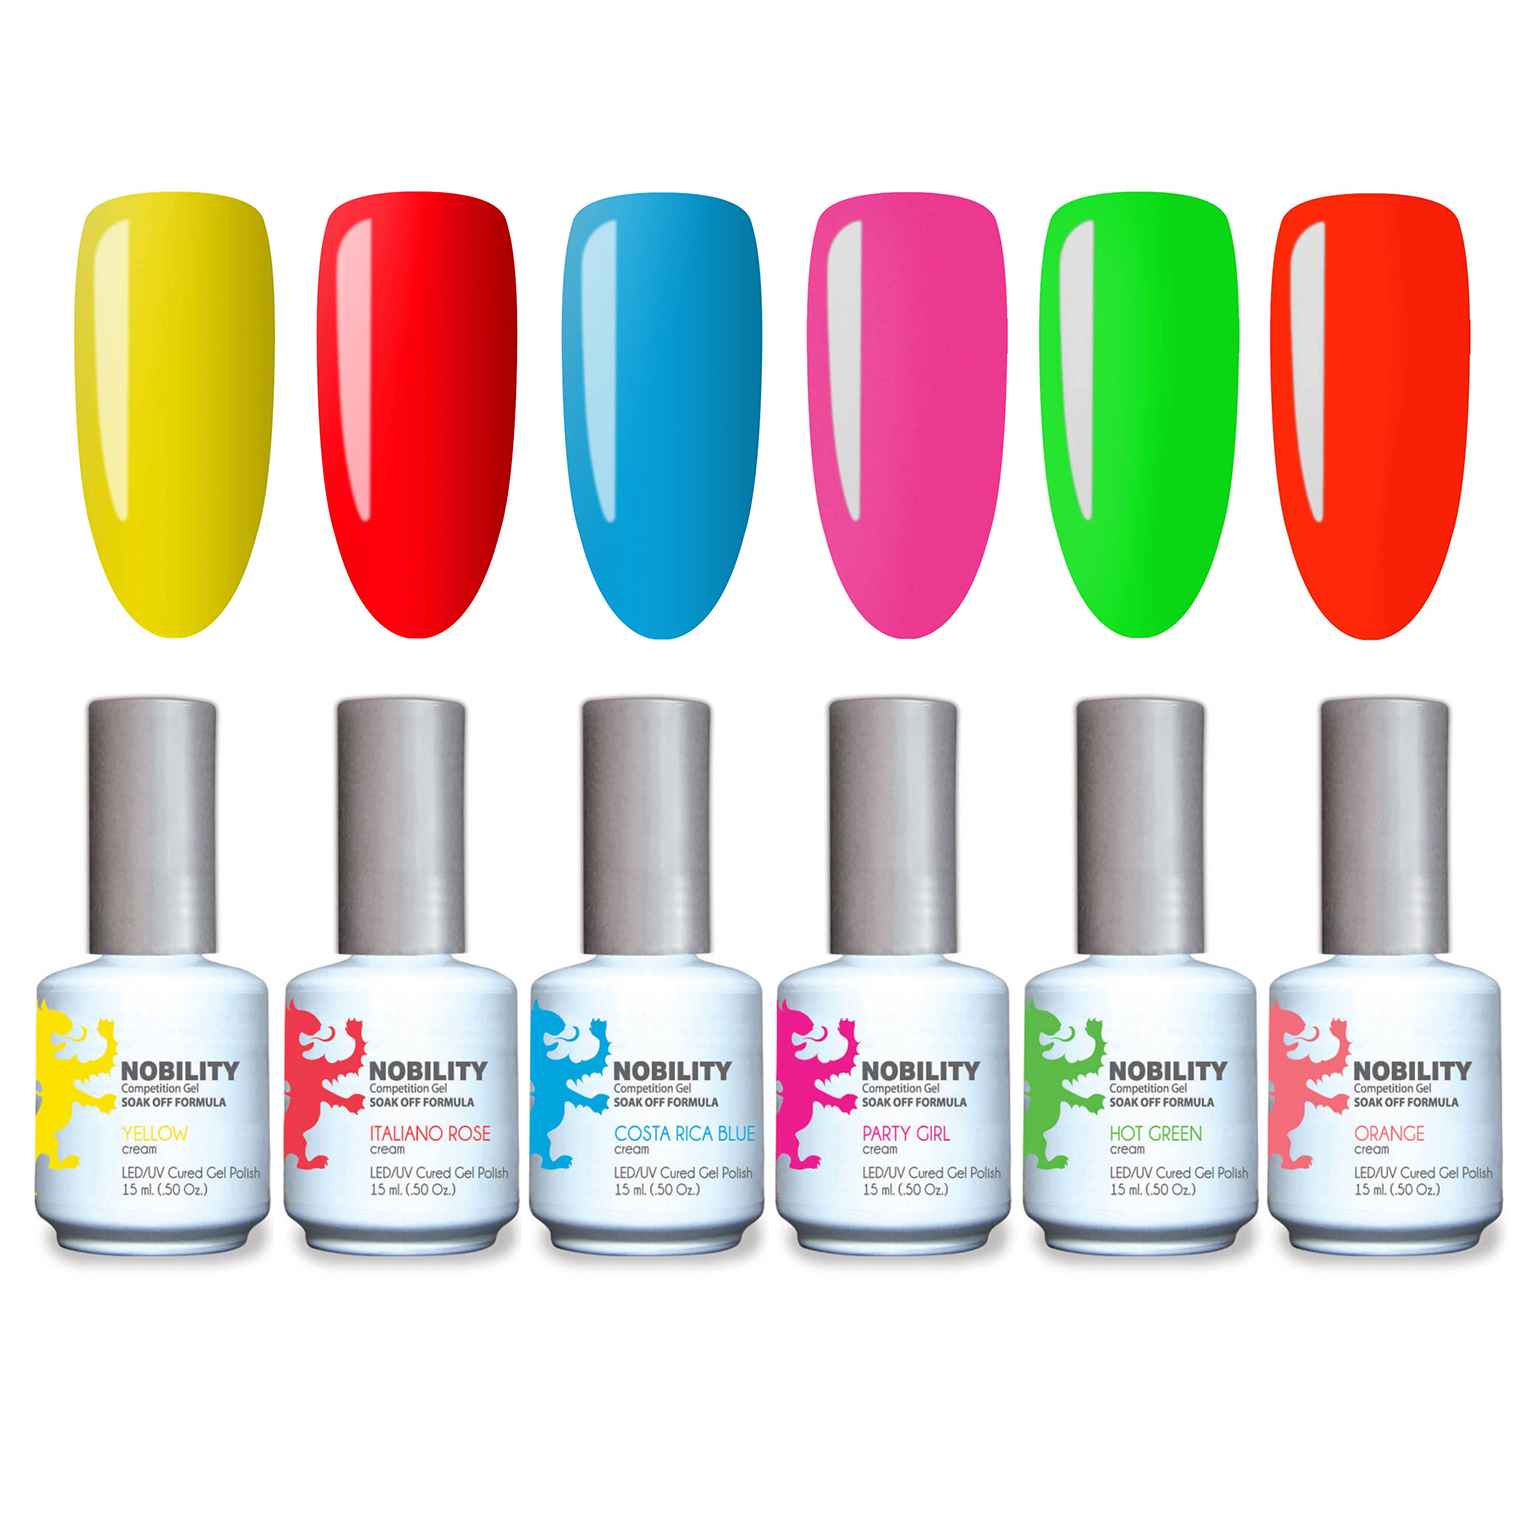 Nobility Gel Polish Kit Neon Colors 6 pcs N6S01 | KHDA Approved Beauty ...